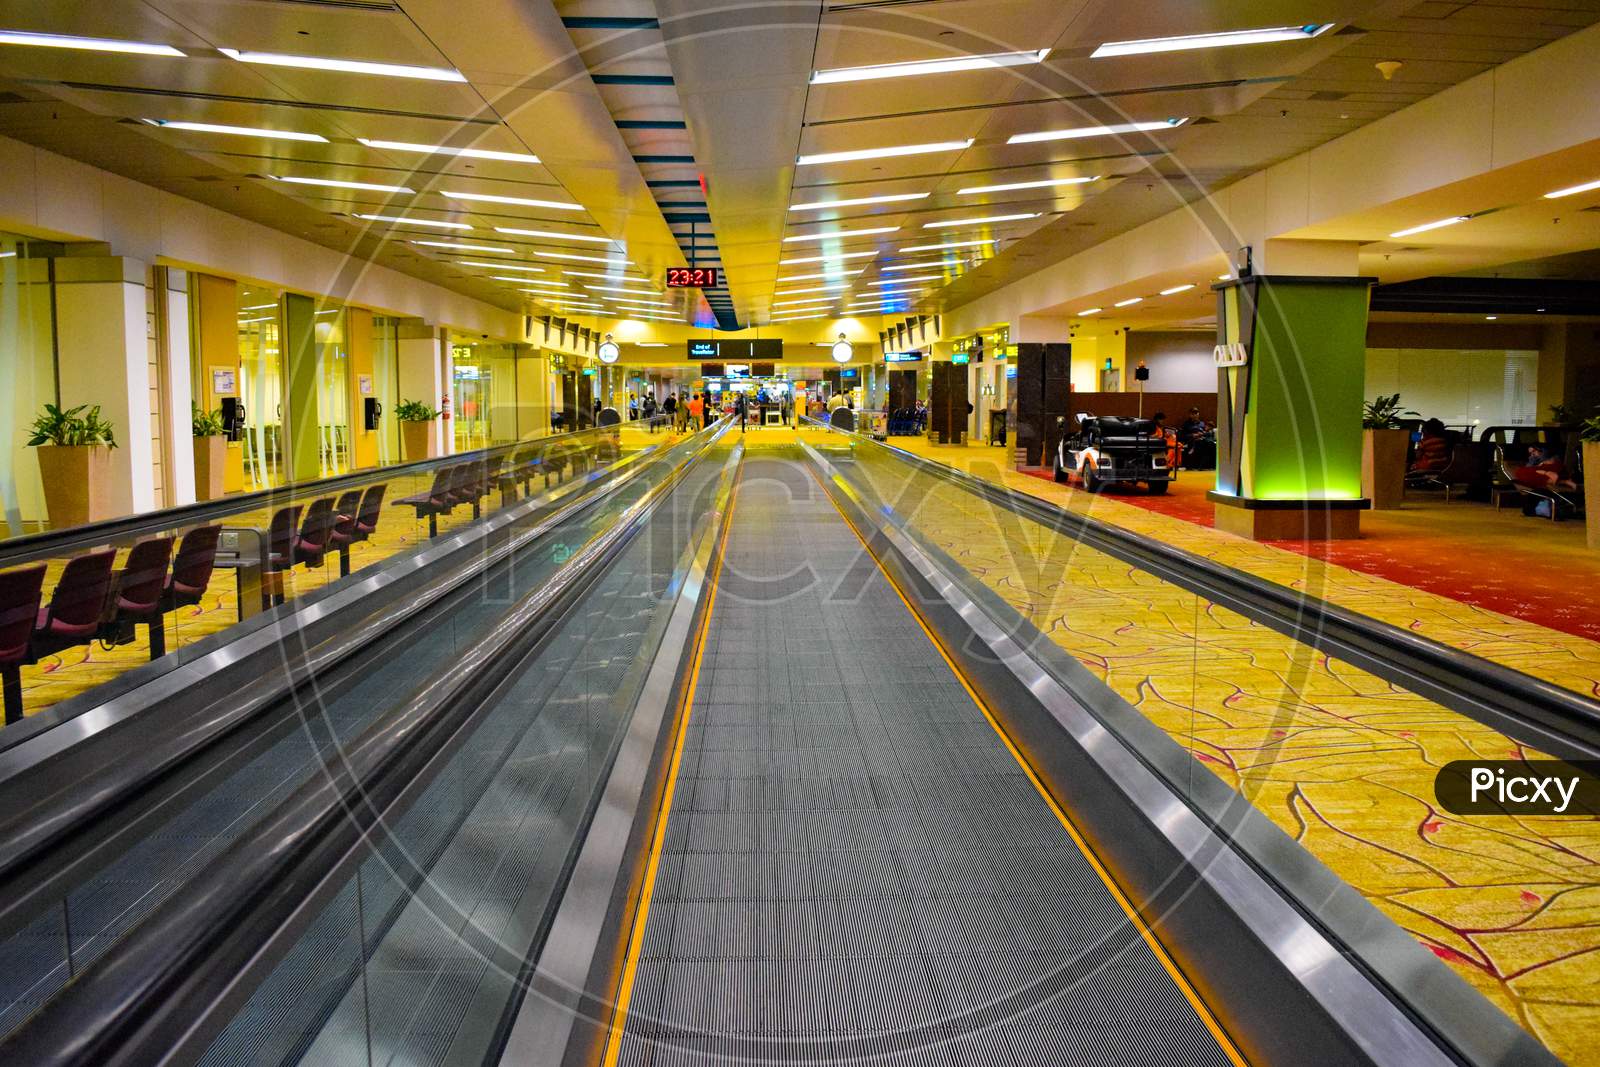 Singapore - Circa August, 2016: Inside Of Singapore Changi Airport. Singapore Changi Airport Is The Primary Civilian Airport For Singapore, And One Of The Largest Transportation Hubs In Southeast Asia